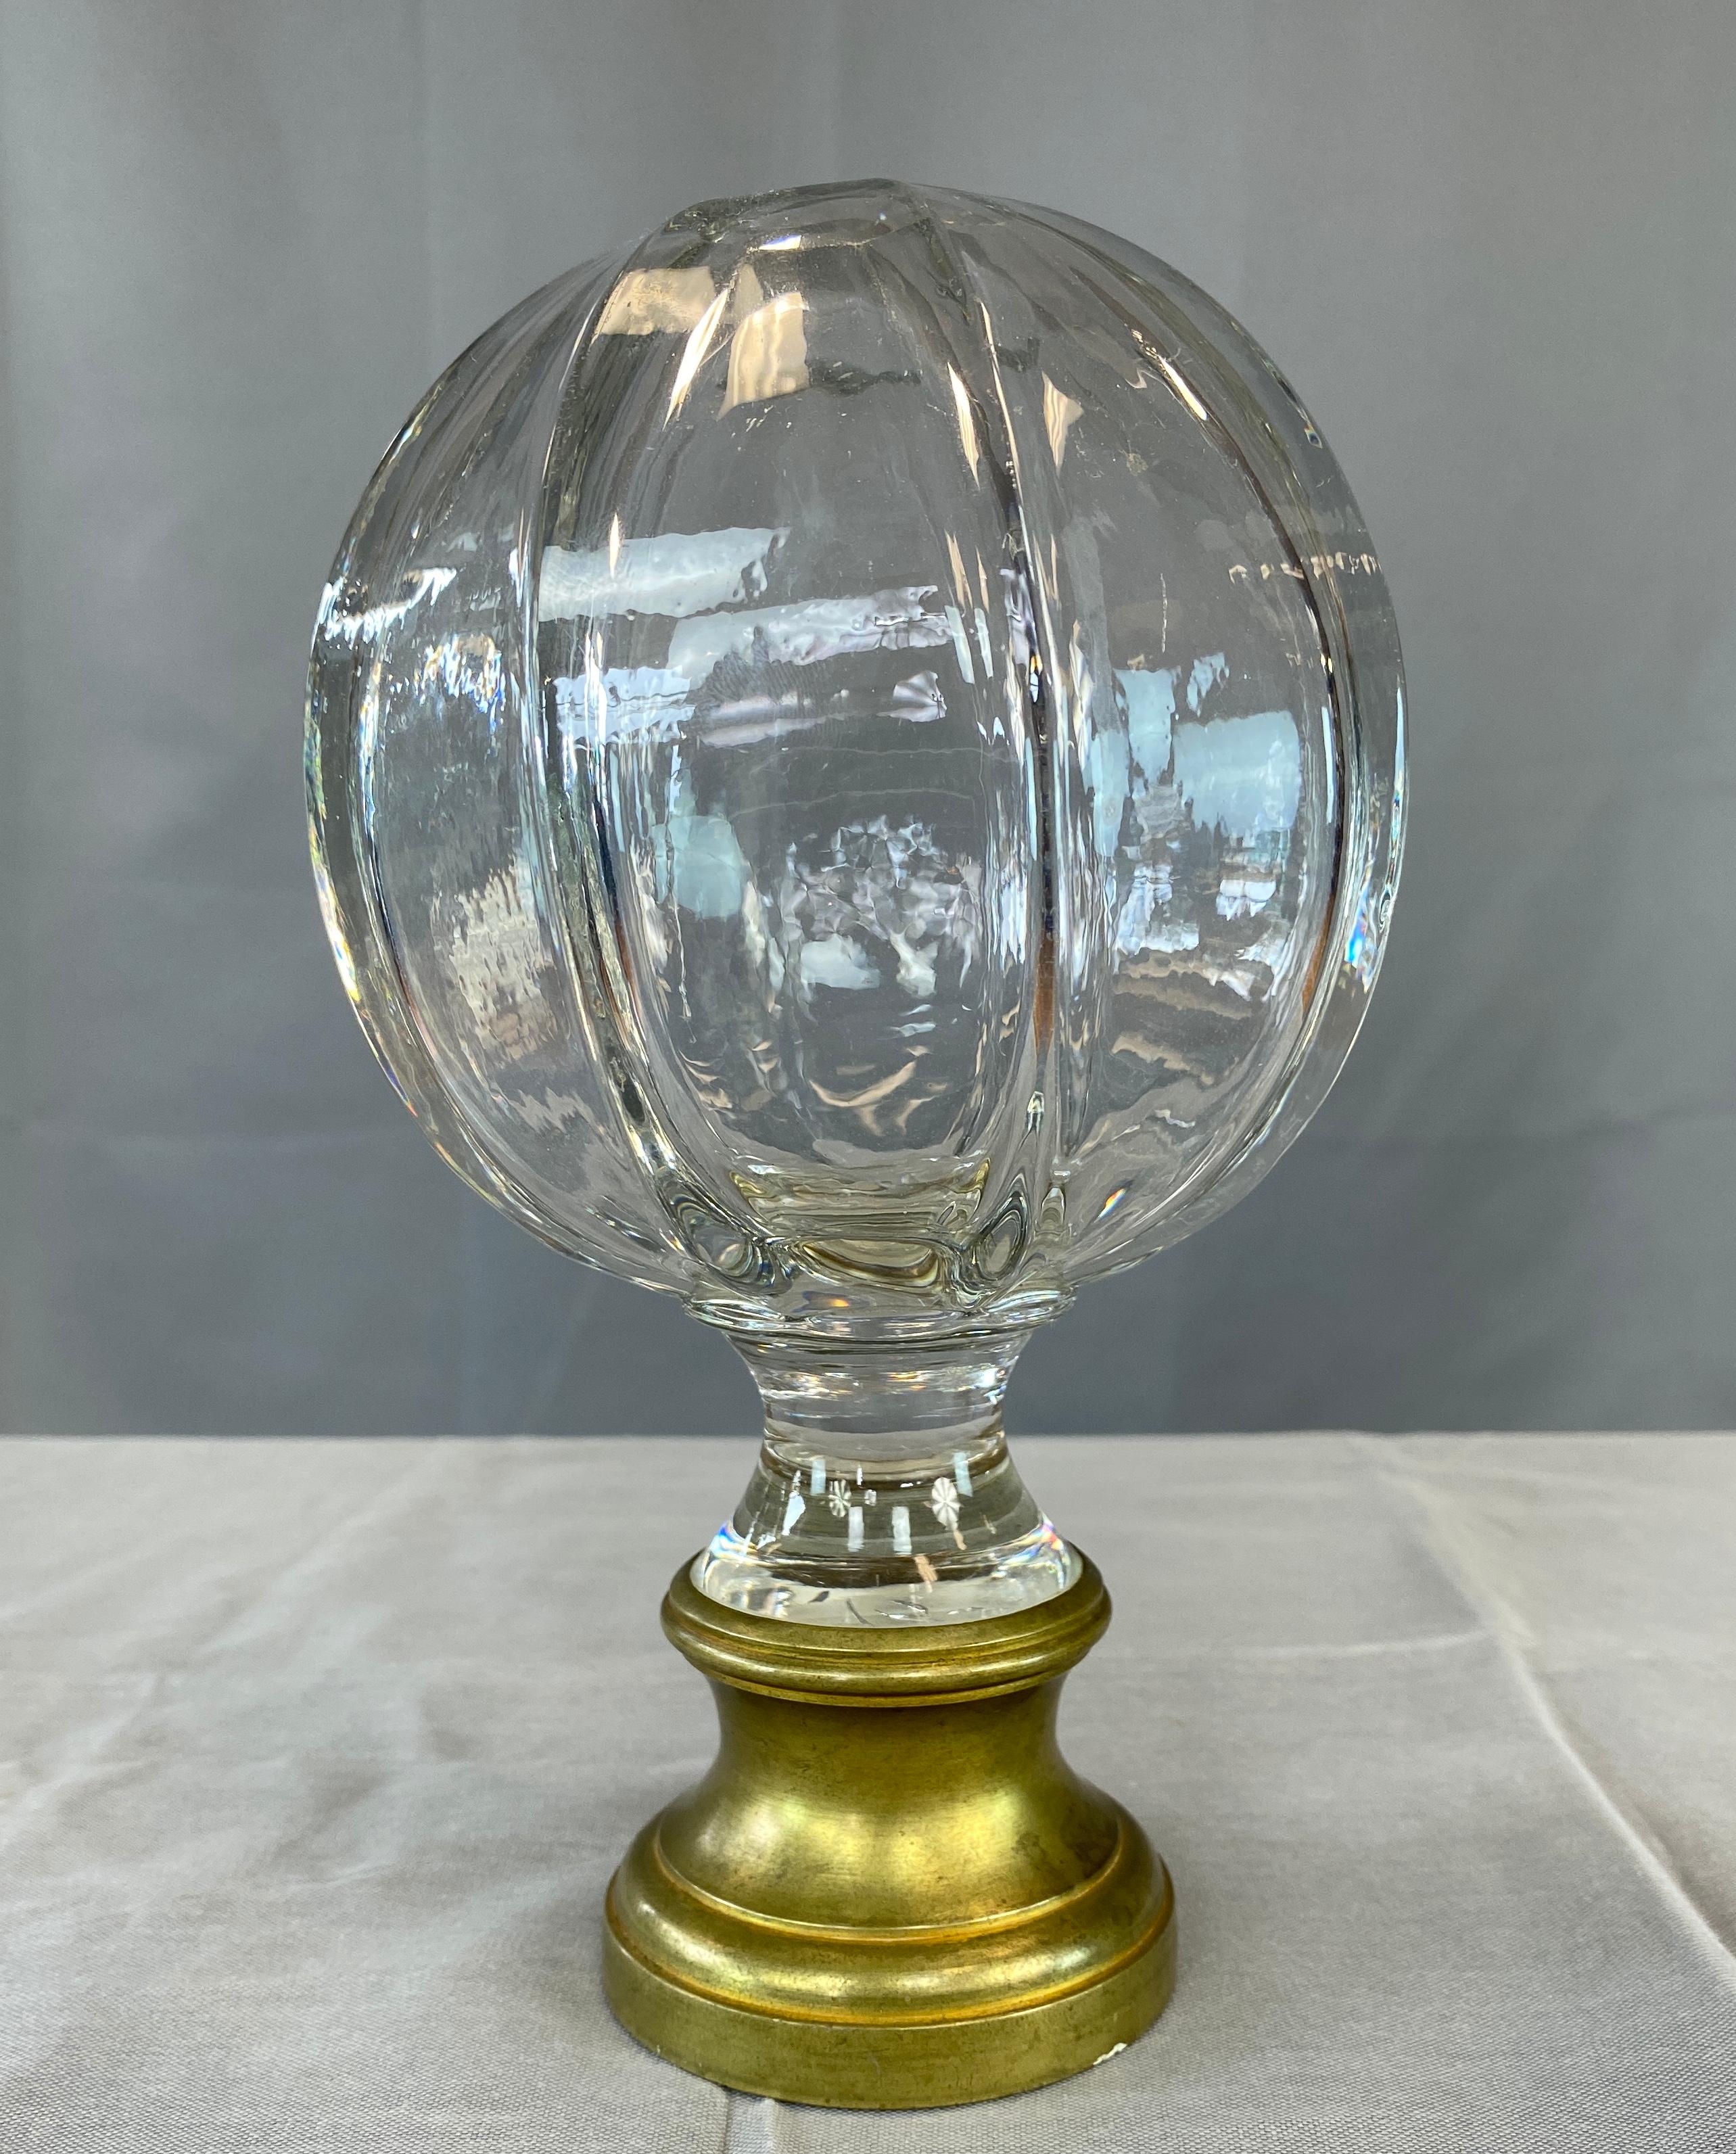 Offered here is a circa early 1900's crystal and brass newel post finial/stair ball (aka boule d'escalier).
Extra large 8 side crystal ball, set into a brass stem. 
  